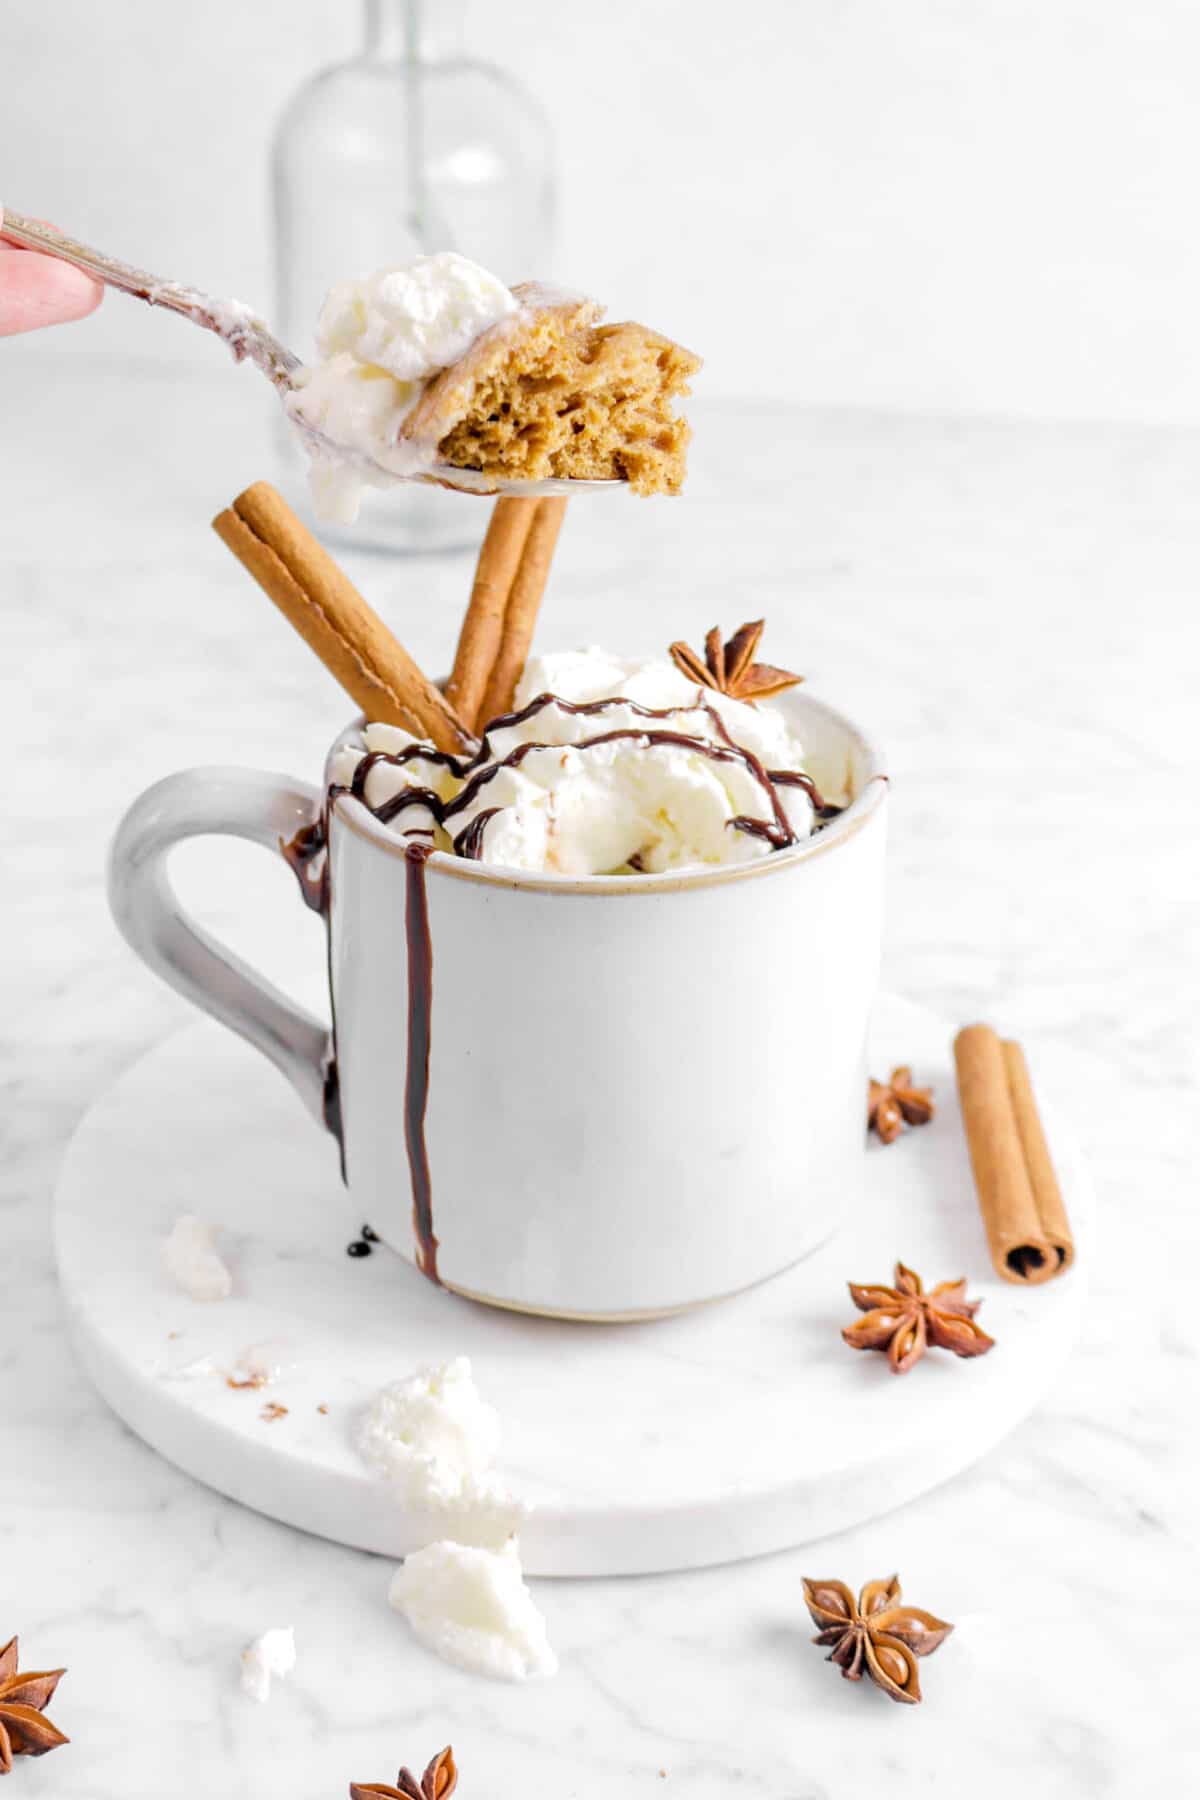 spoon held above mug with cake and whipped cream